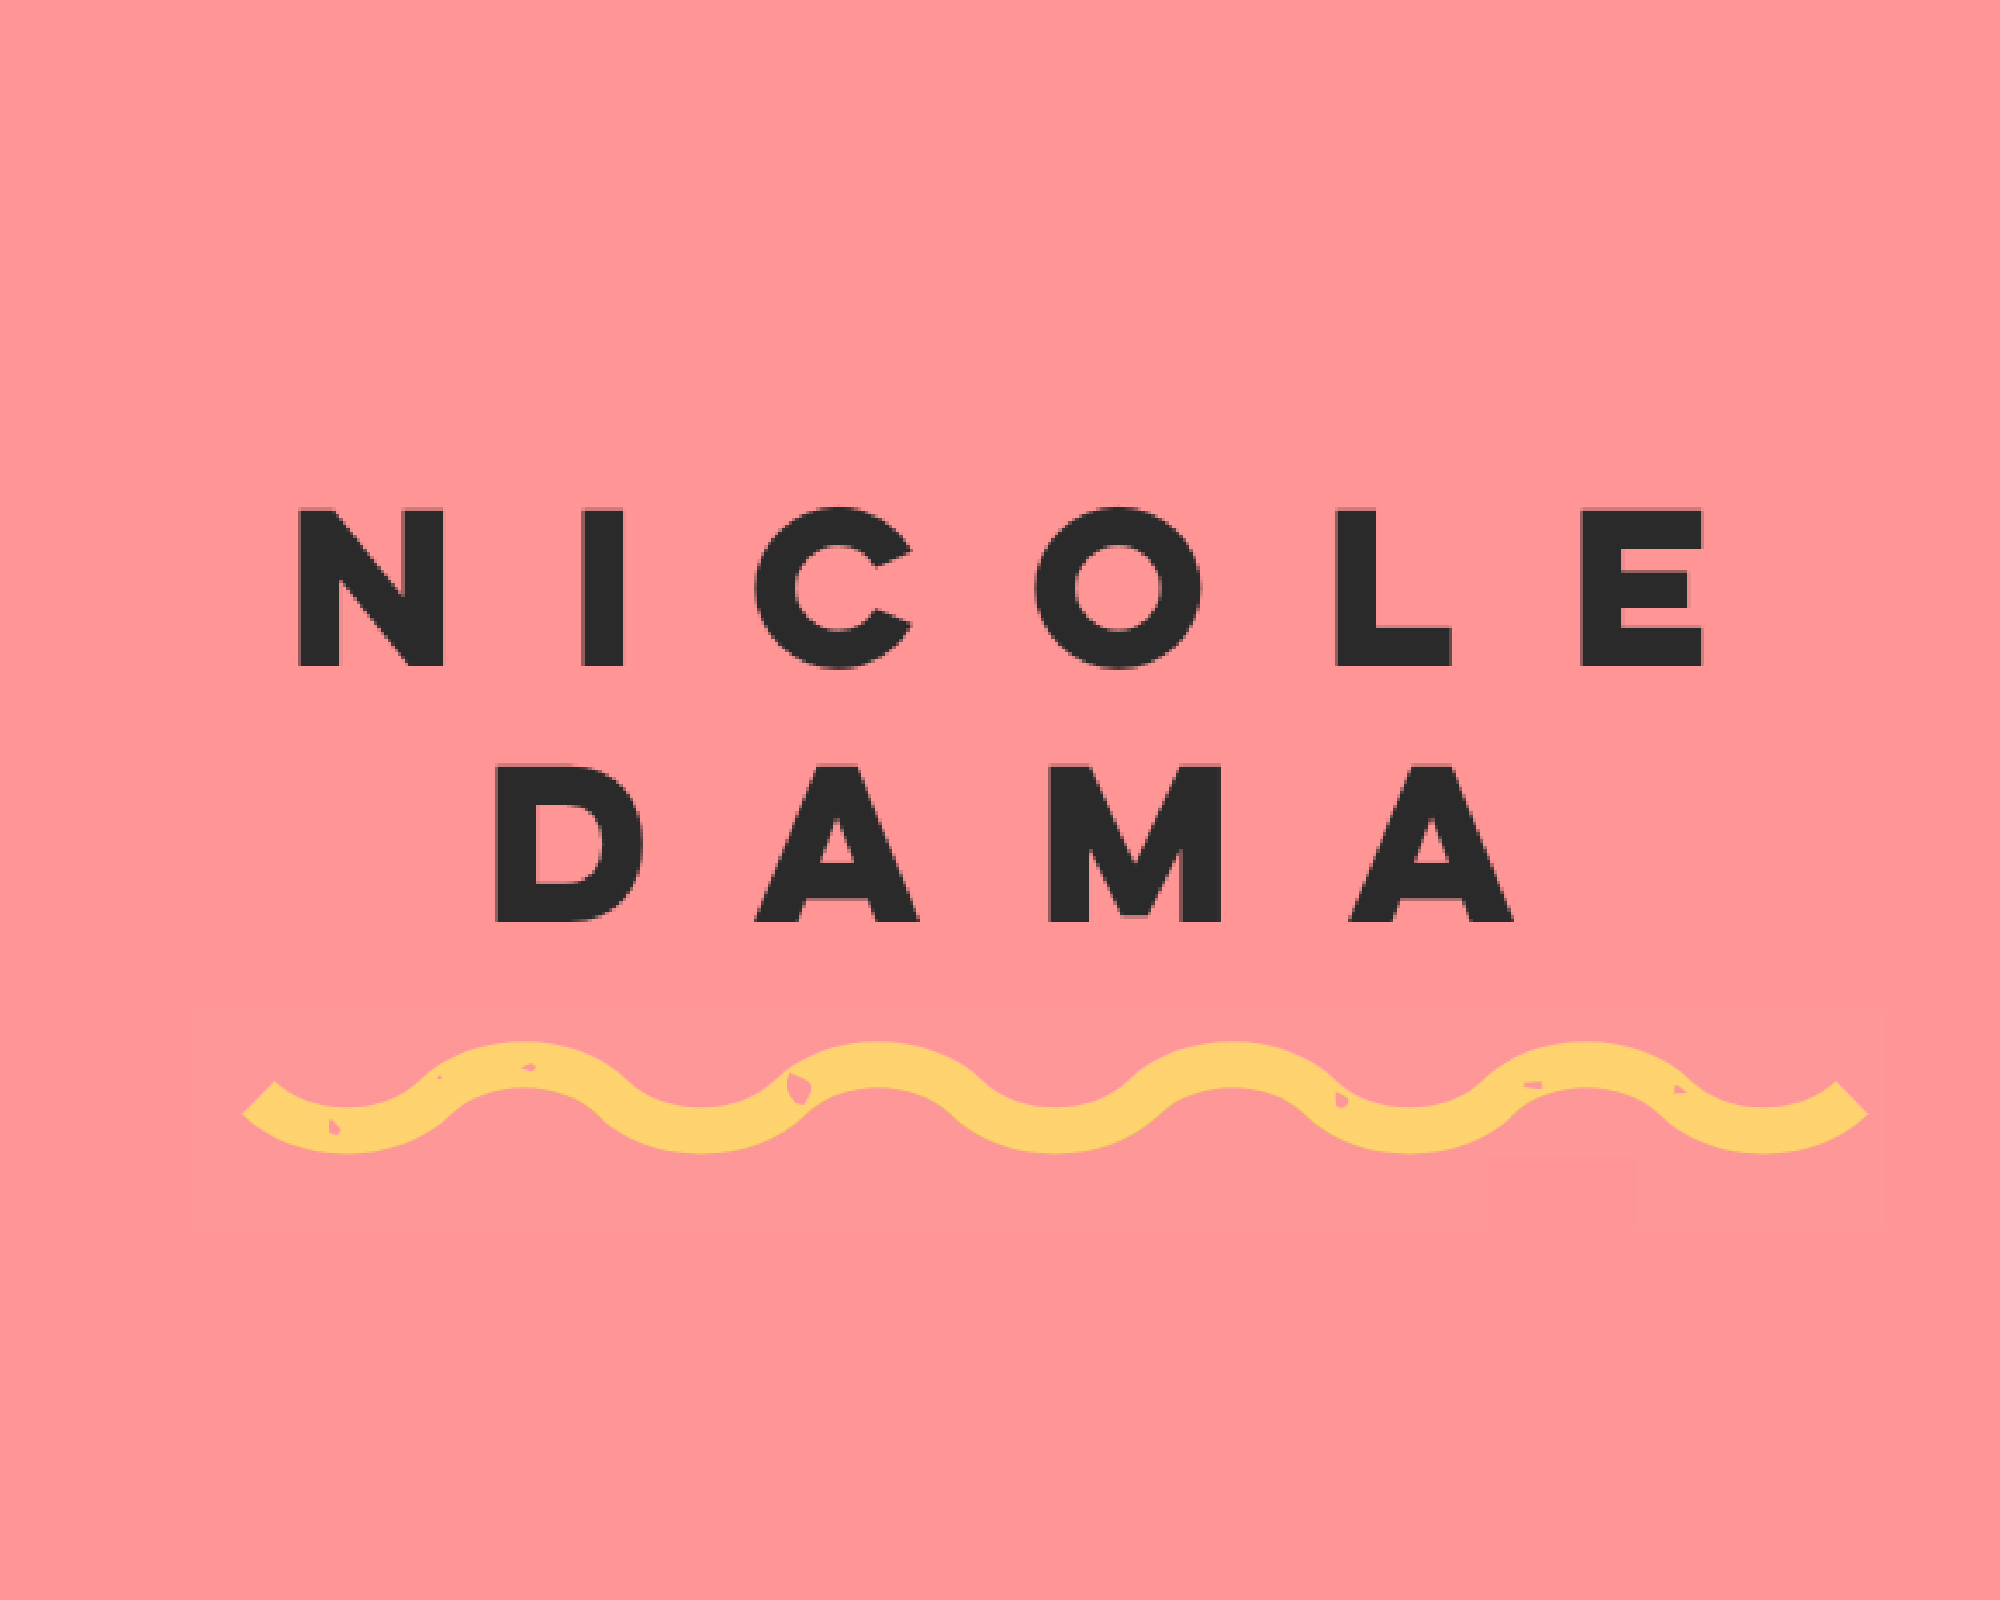 Nicole Dama on pink background with a yellow squiggle